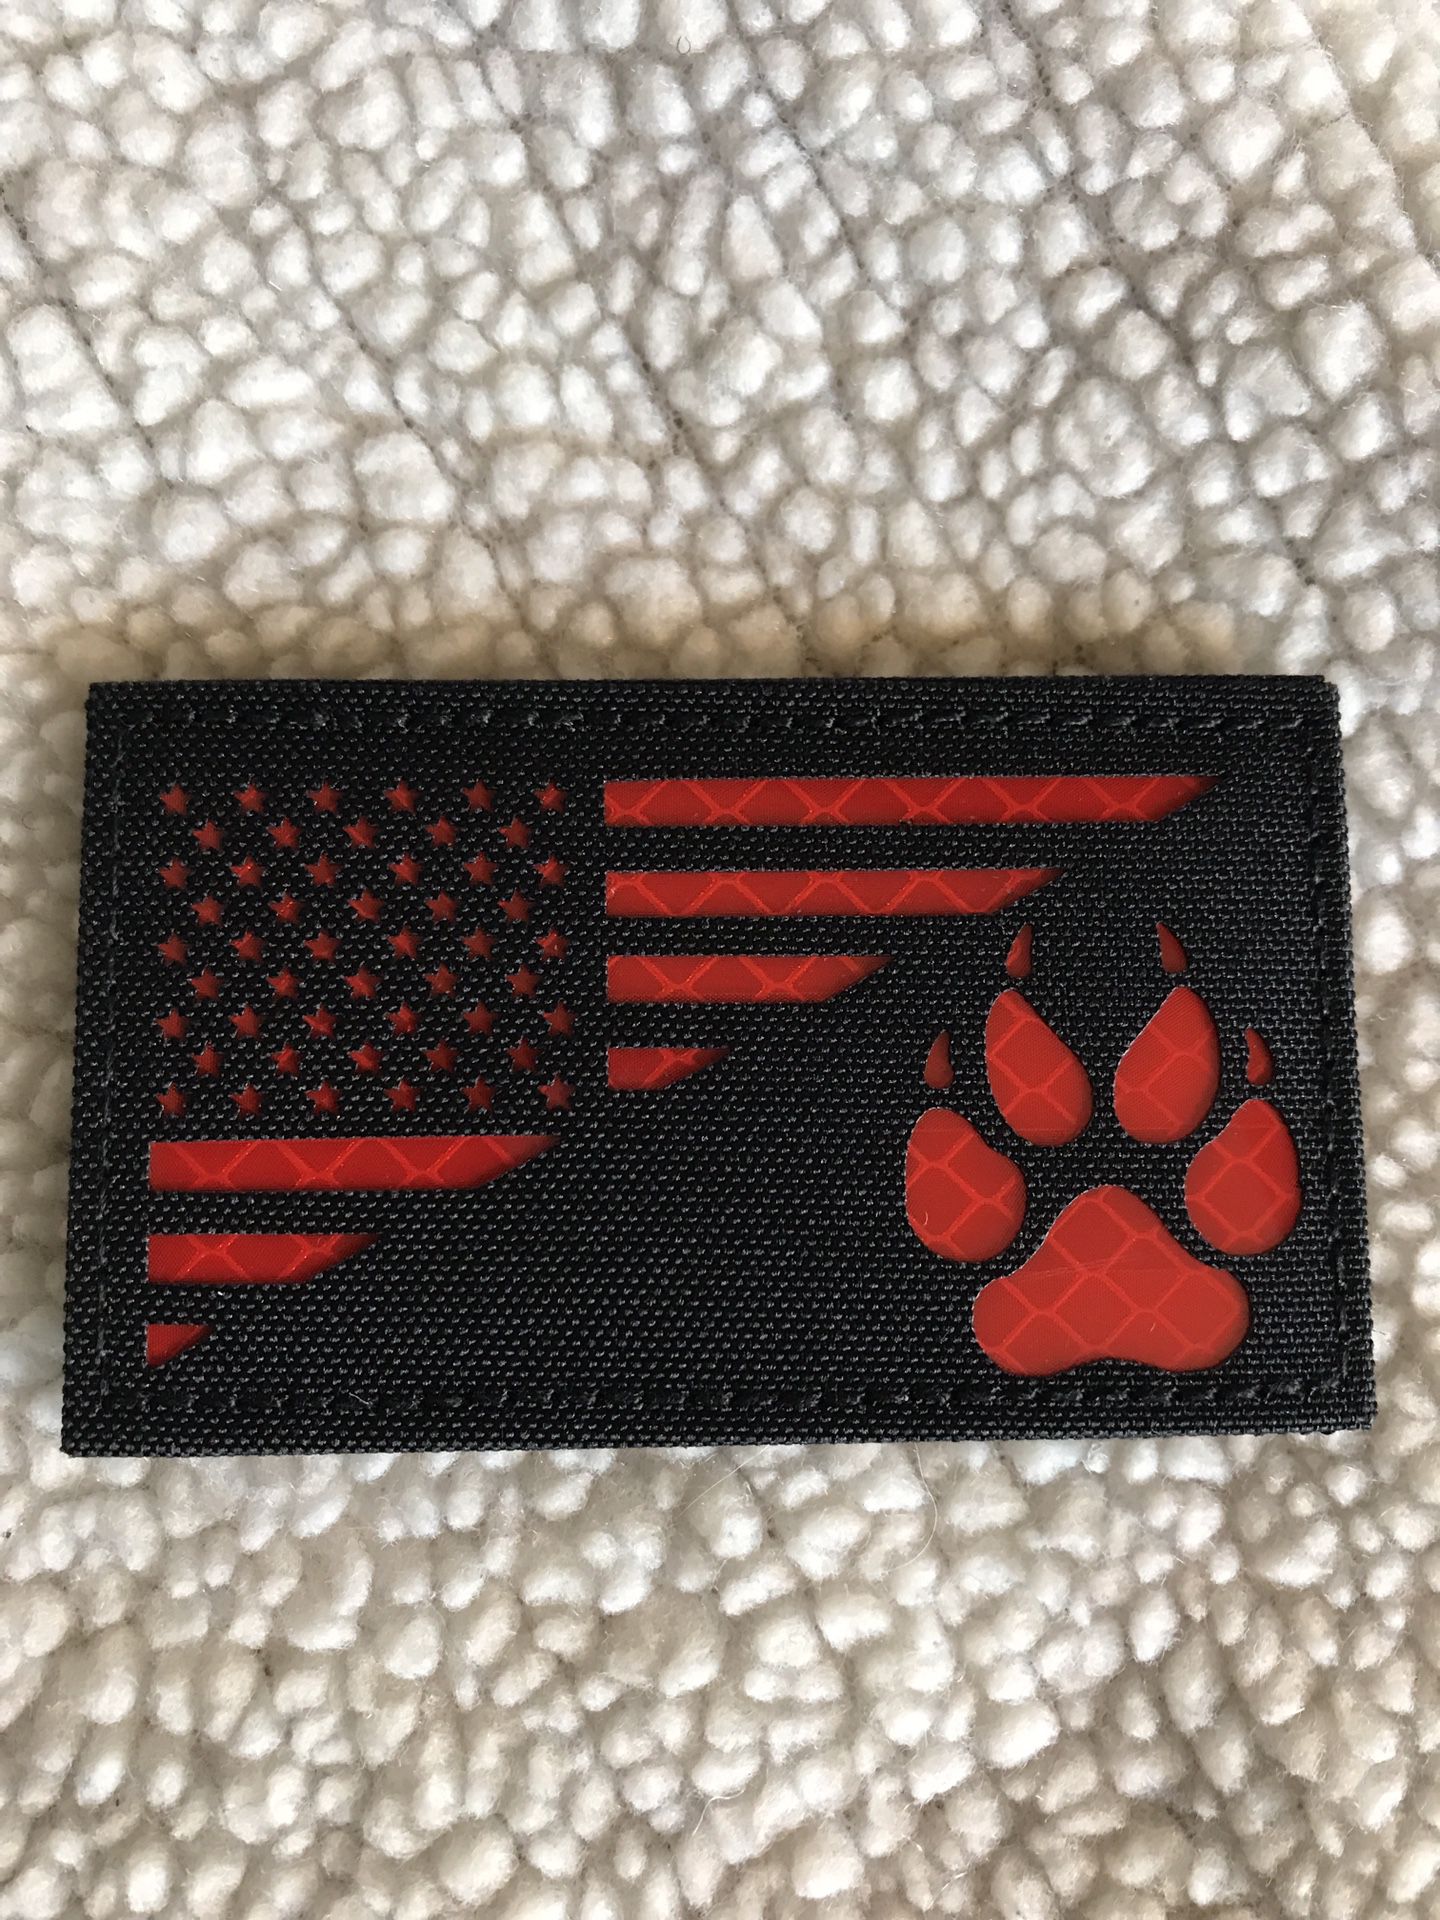 Reflective USA Flag w/ Tracker Paw Tactical Patch 2” x 3.5”